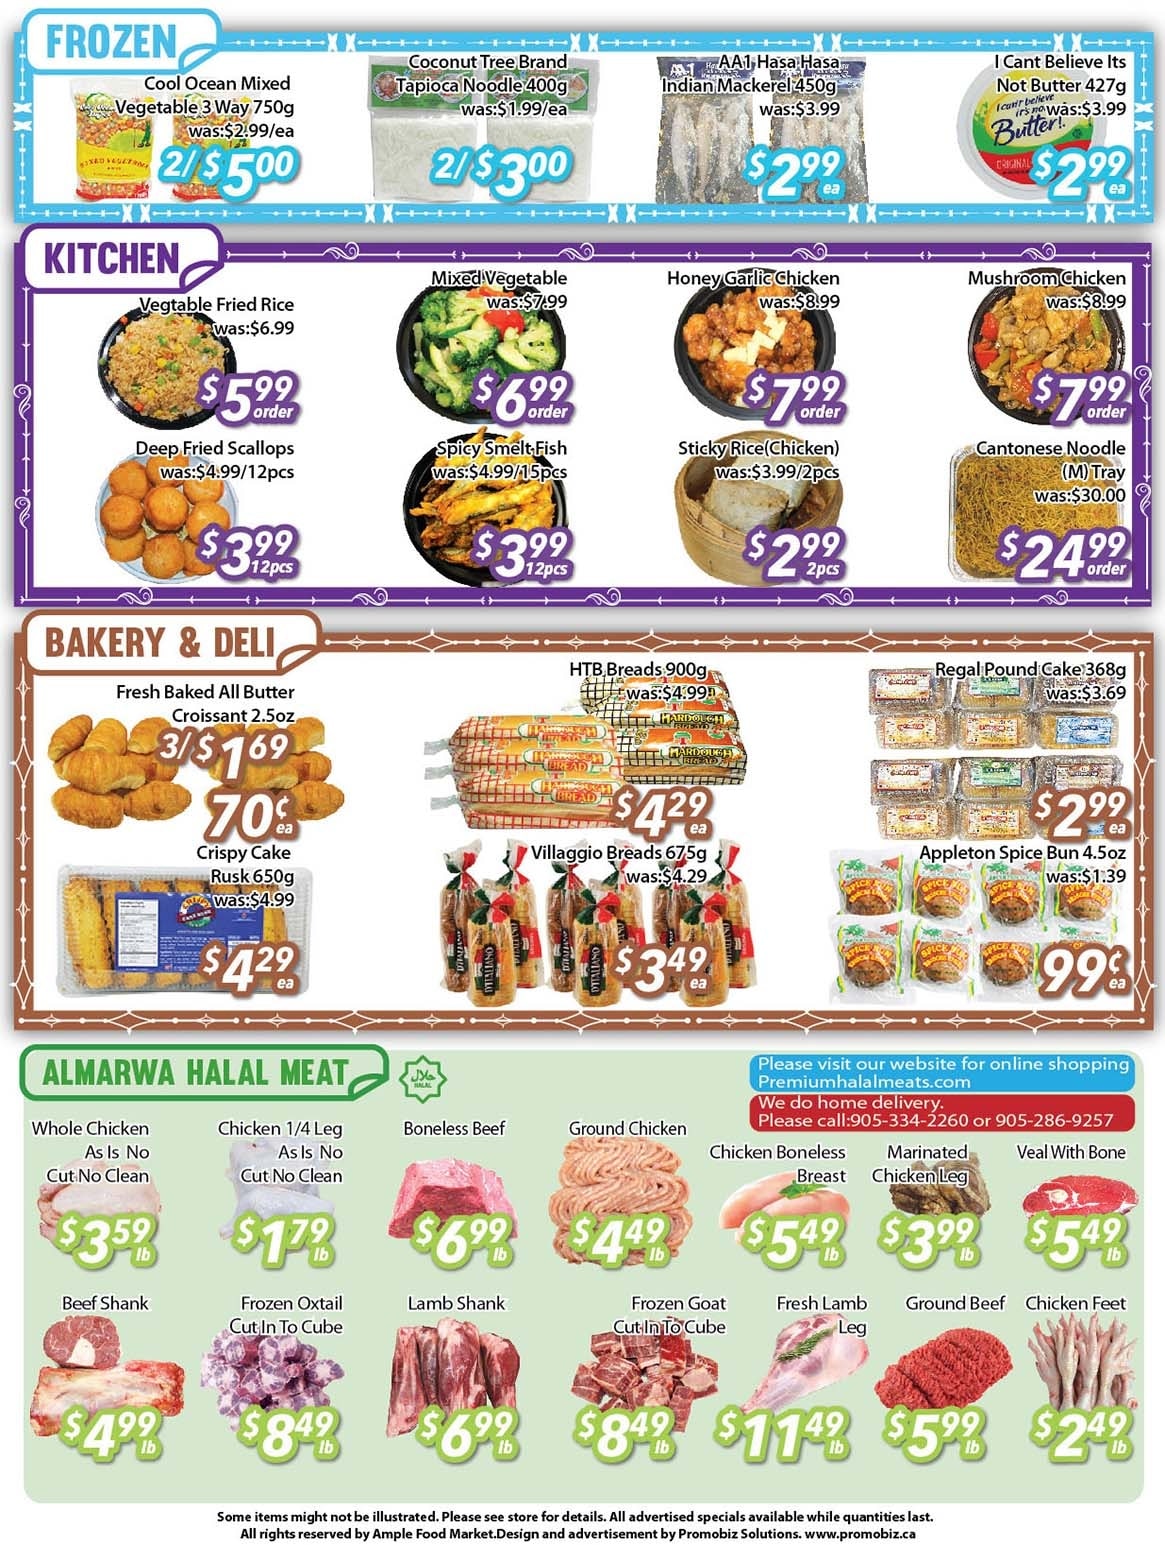 Ample Food Market - Brampton Store - Weekly Flyer Specials - Page 4